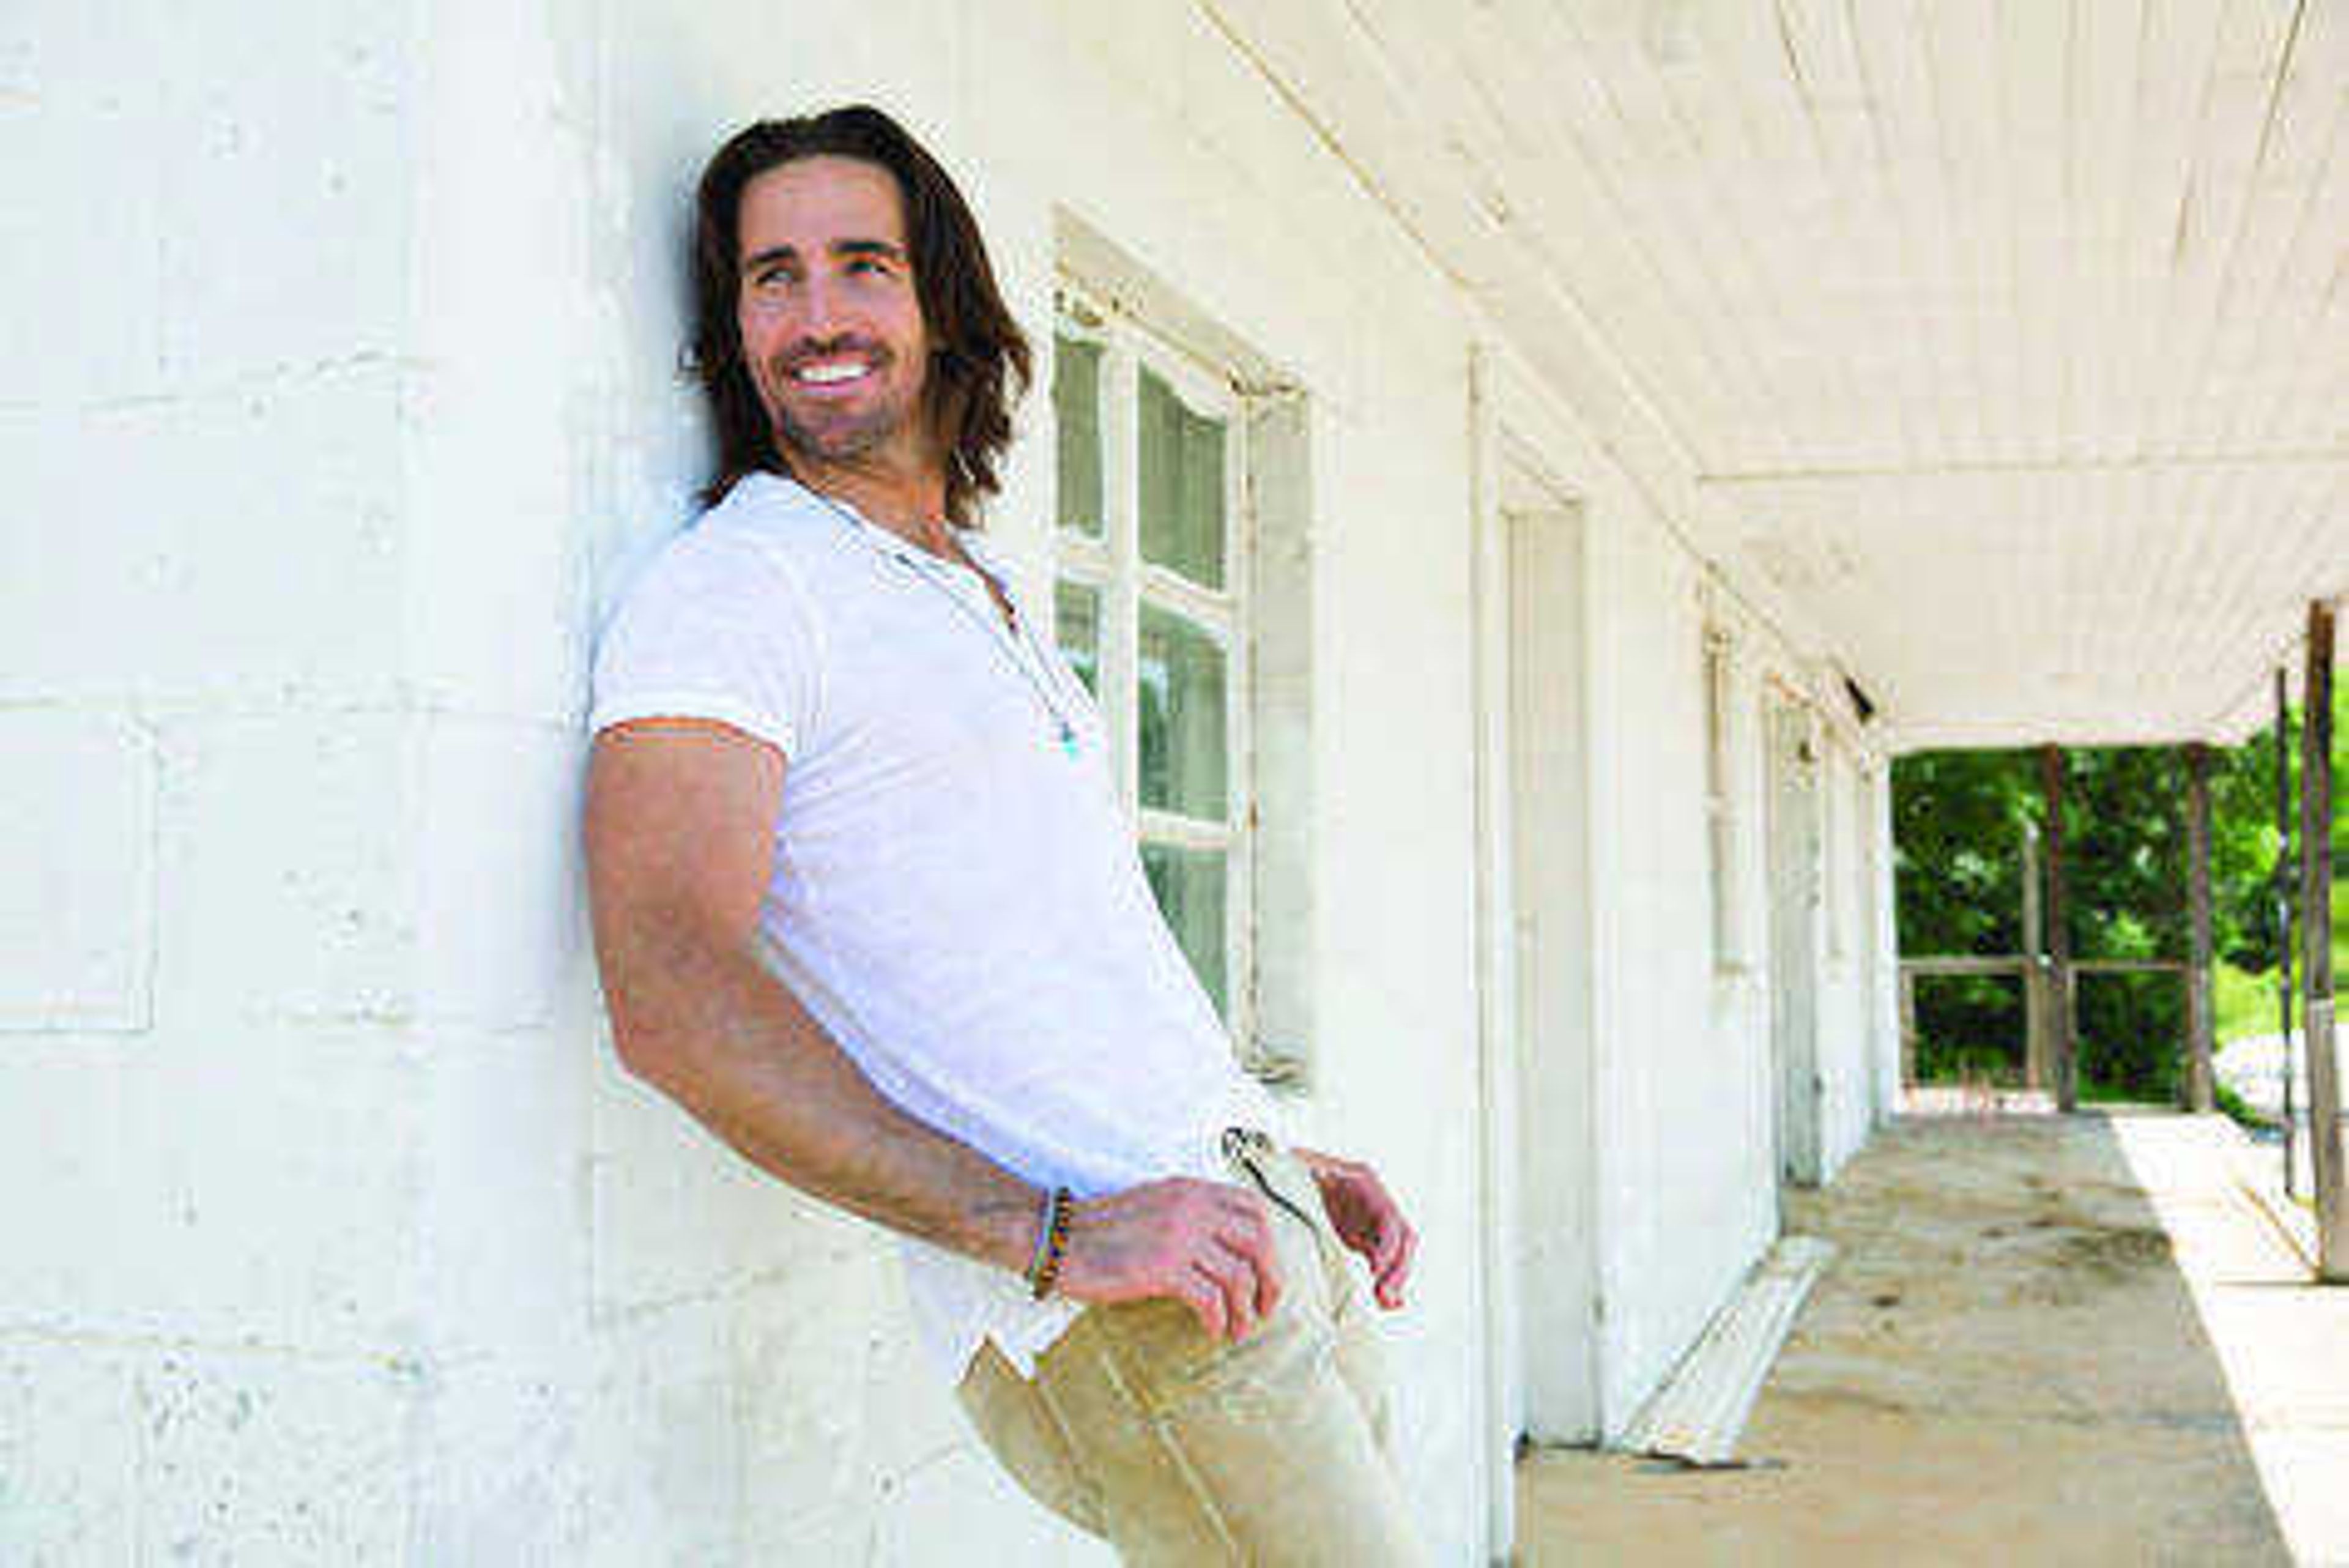 Country artist Jake Owen will be performing at the Show Me Center Sept.18.